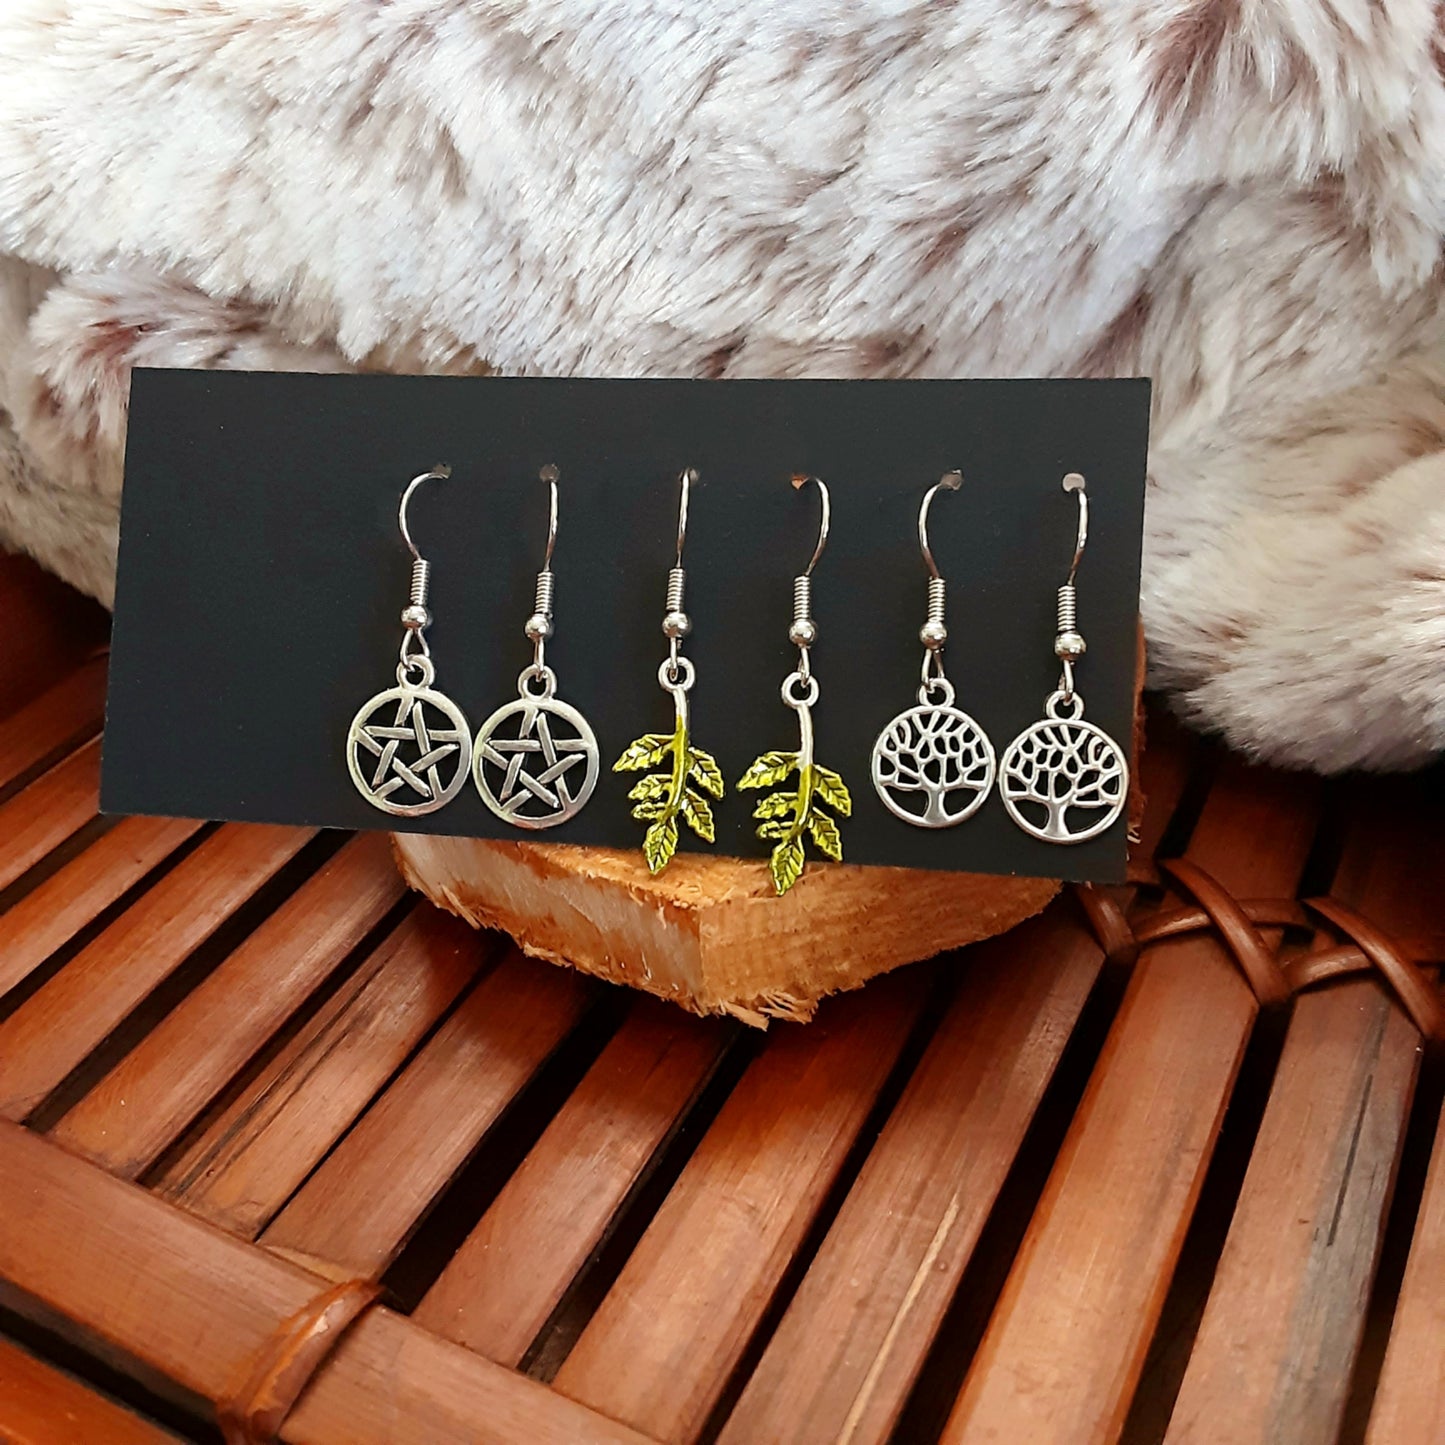 Earrings set with pentacles, trees and leaves